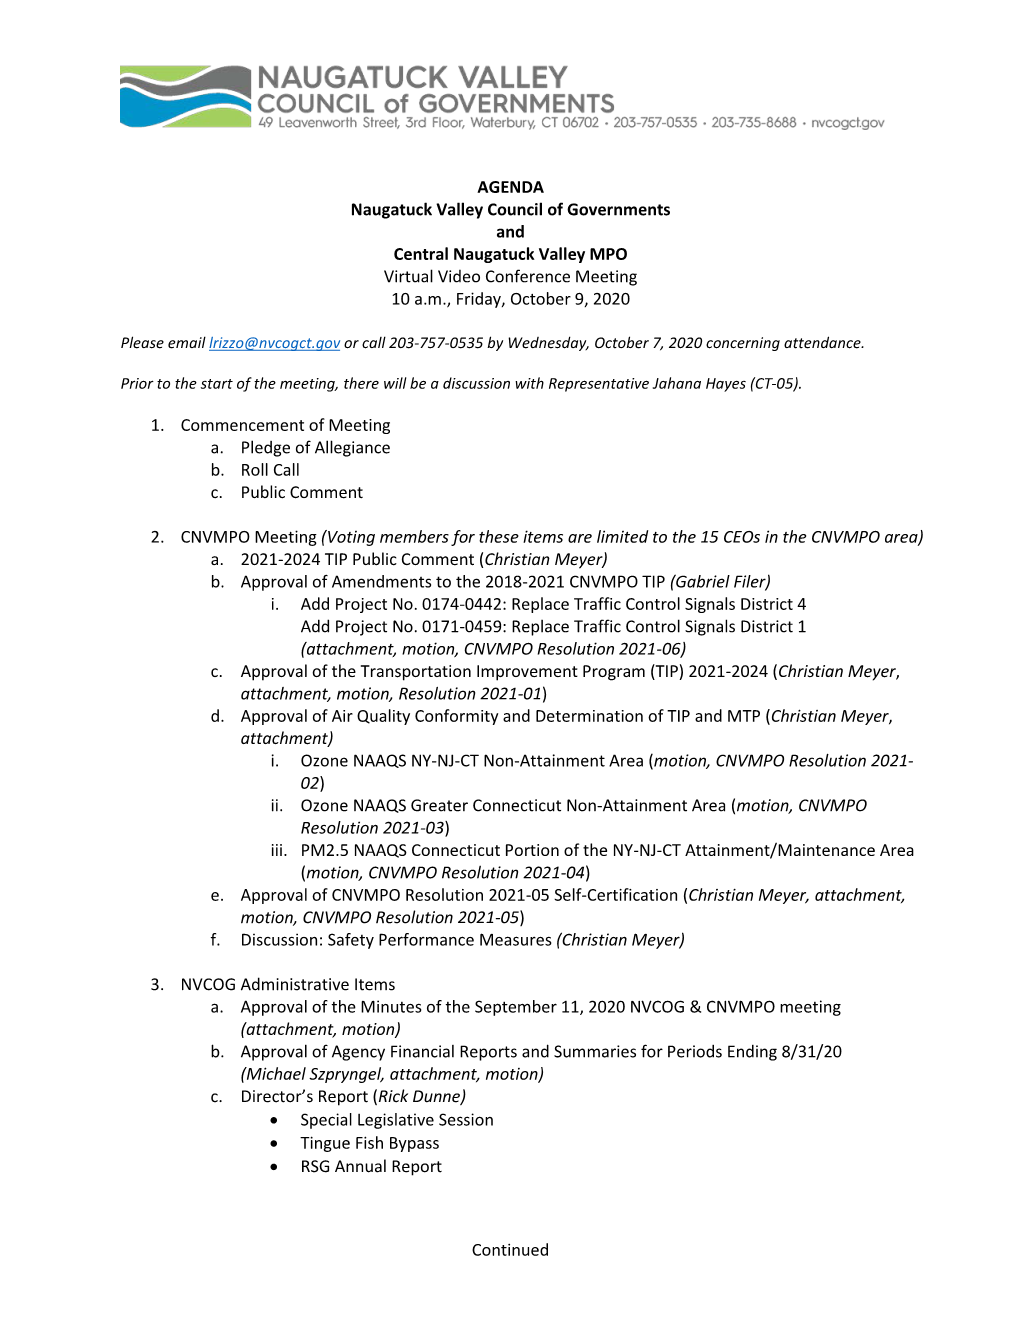 Continued AGENDA Naugatuck Valley Council of Governments And